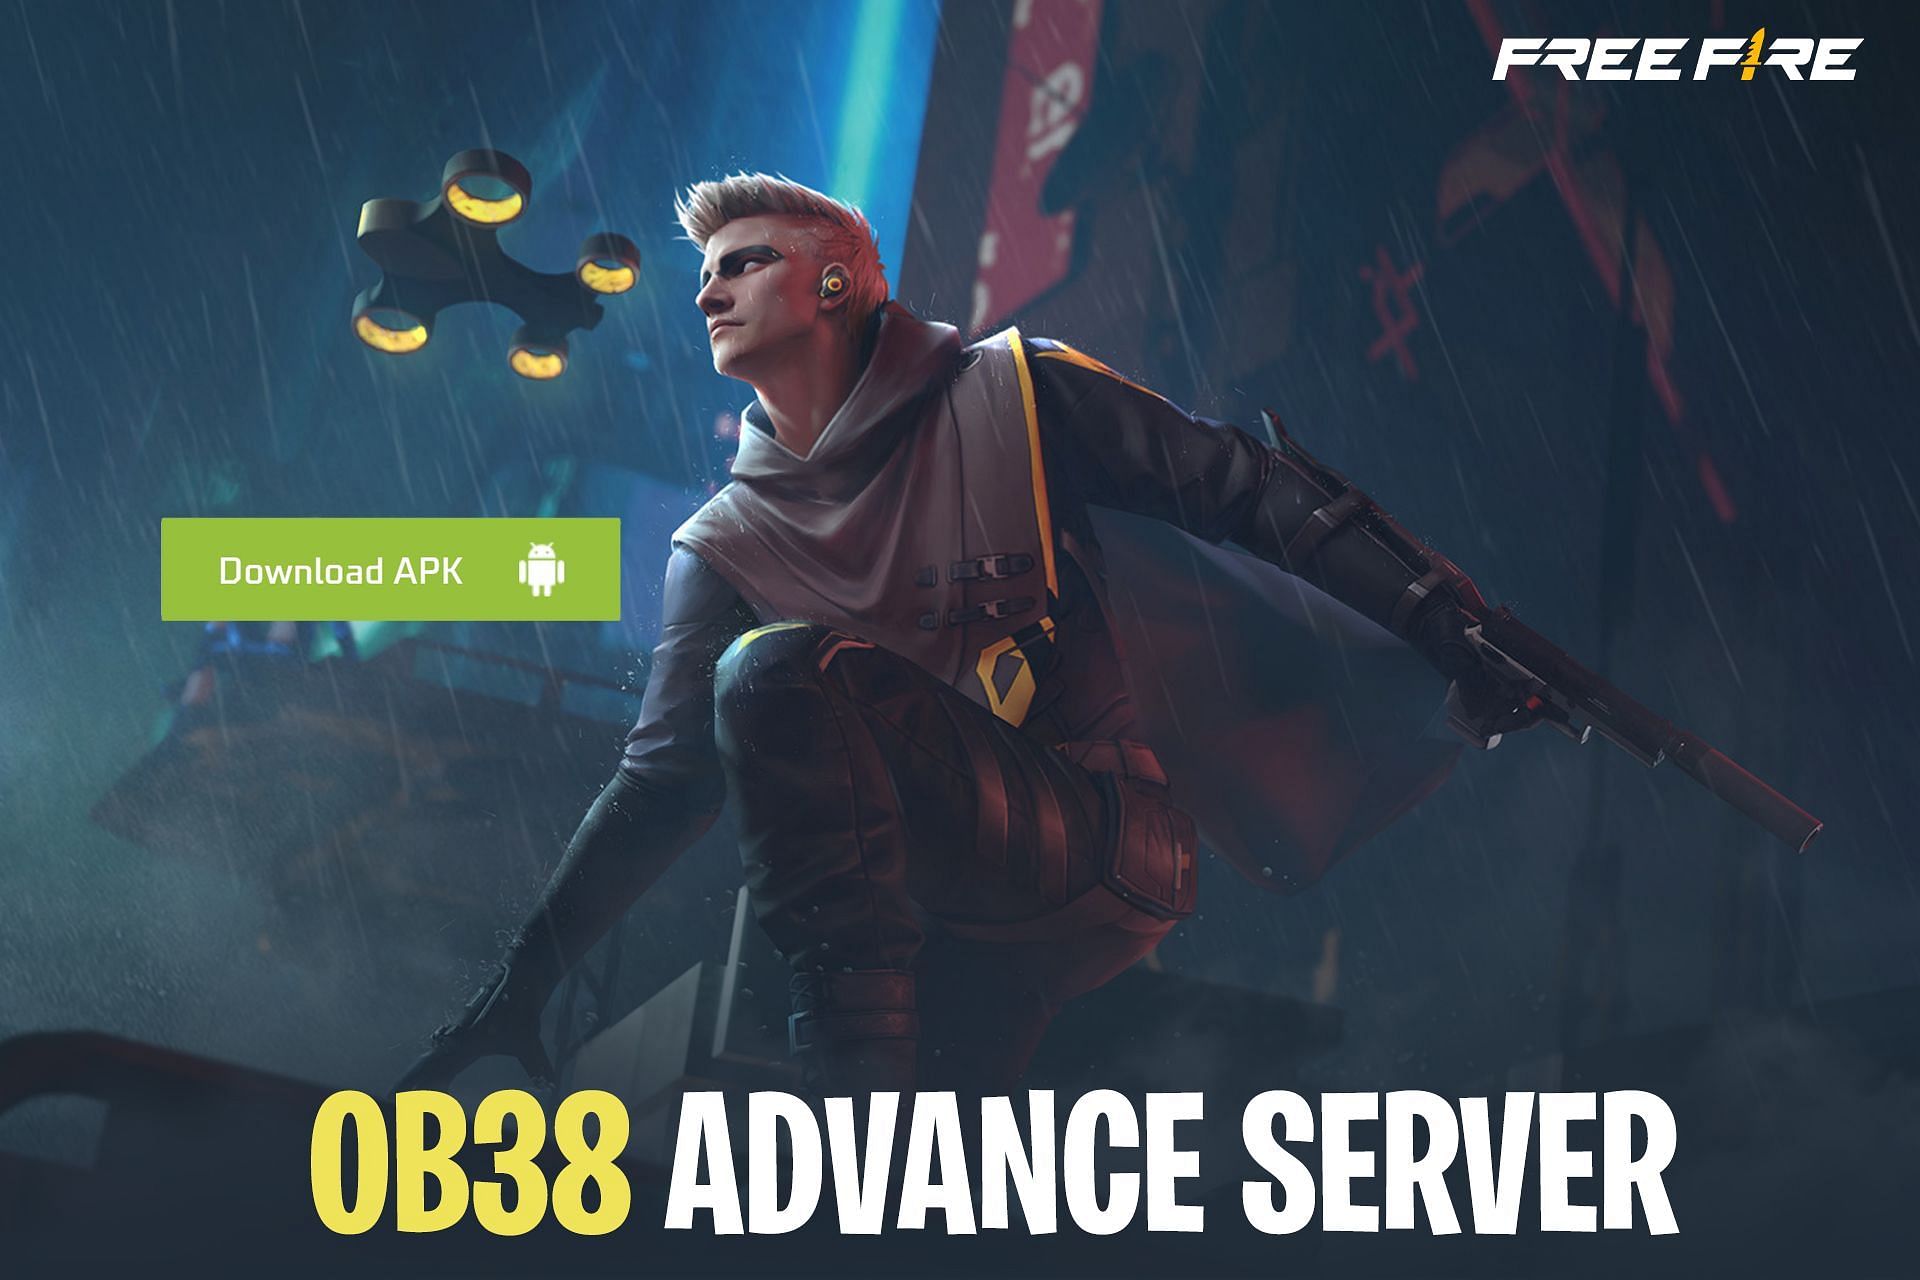 OB38 Advance Server of the game is available for download (Image via Sportskeeda)